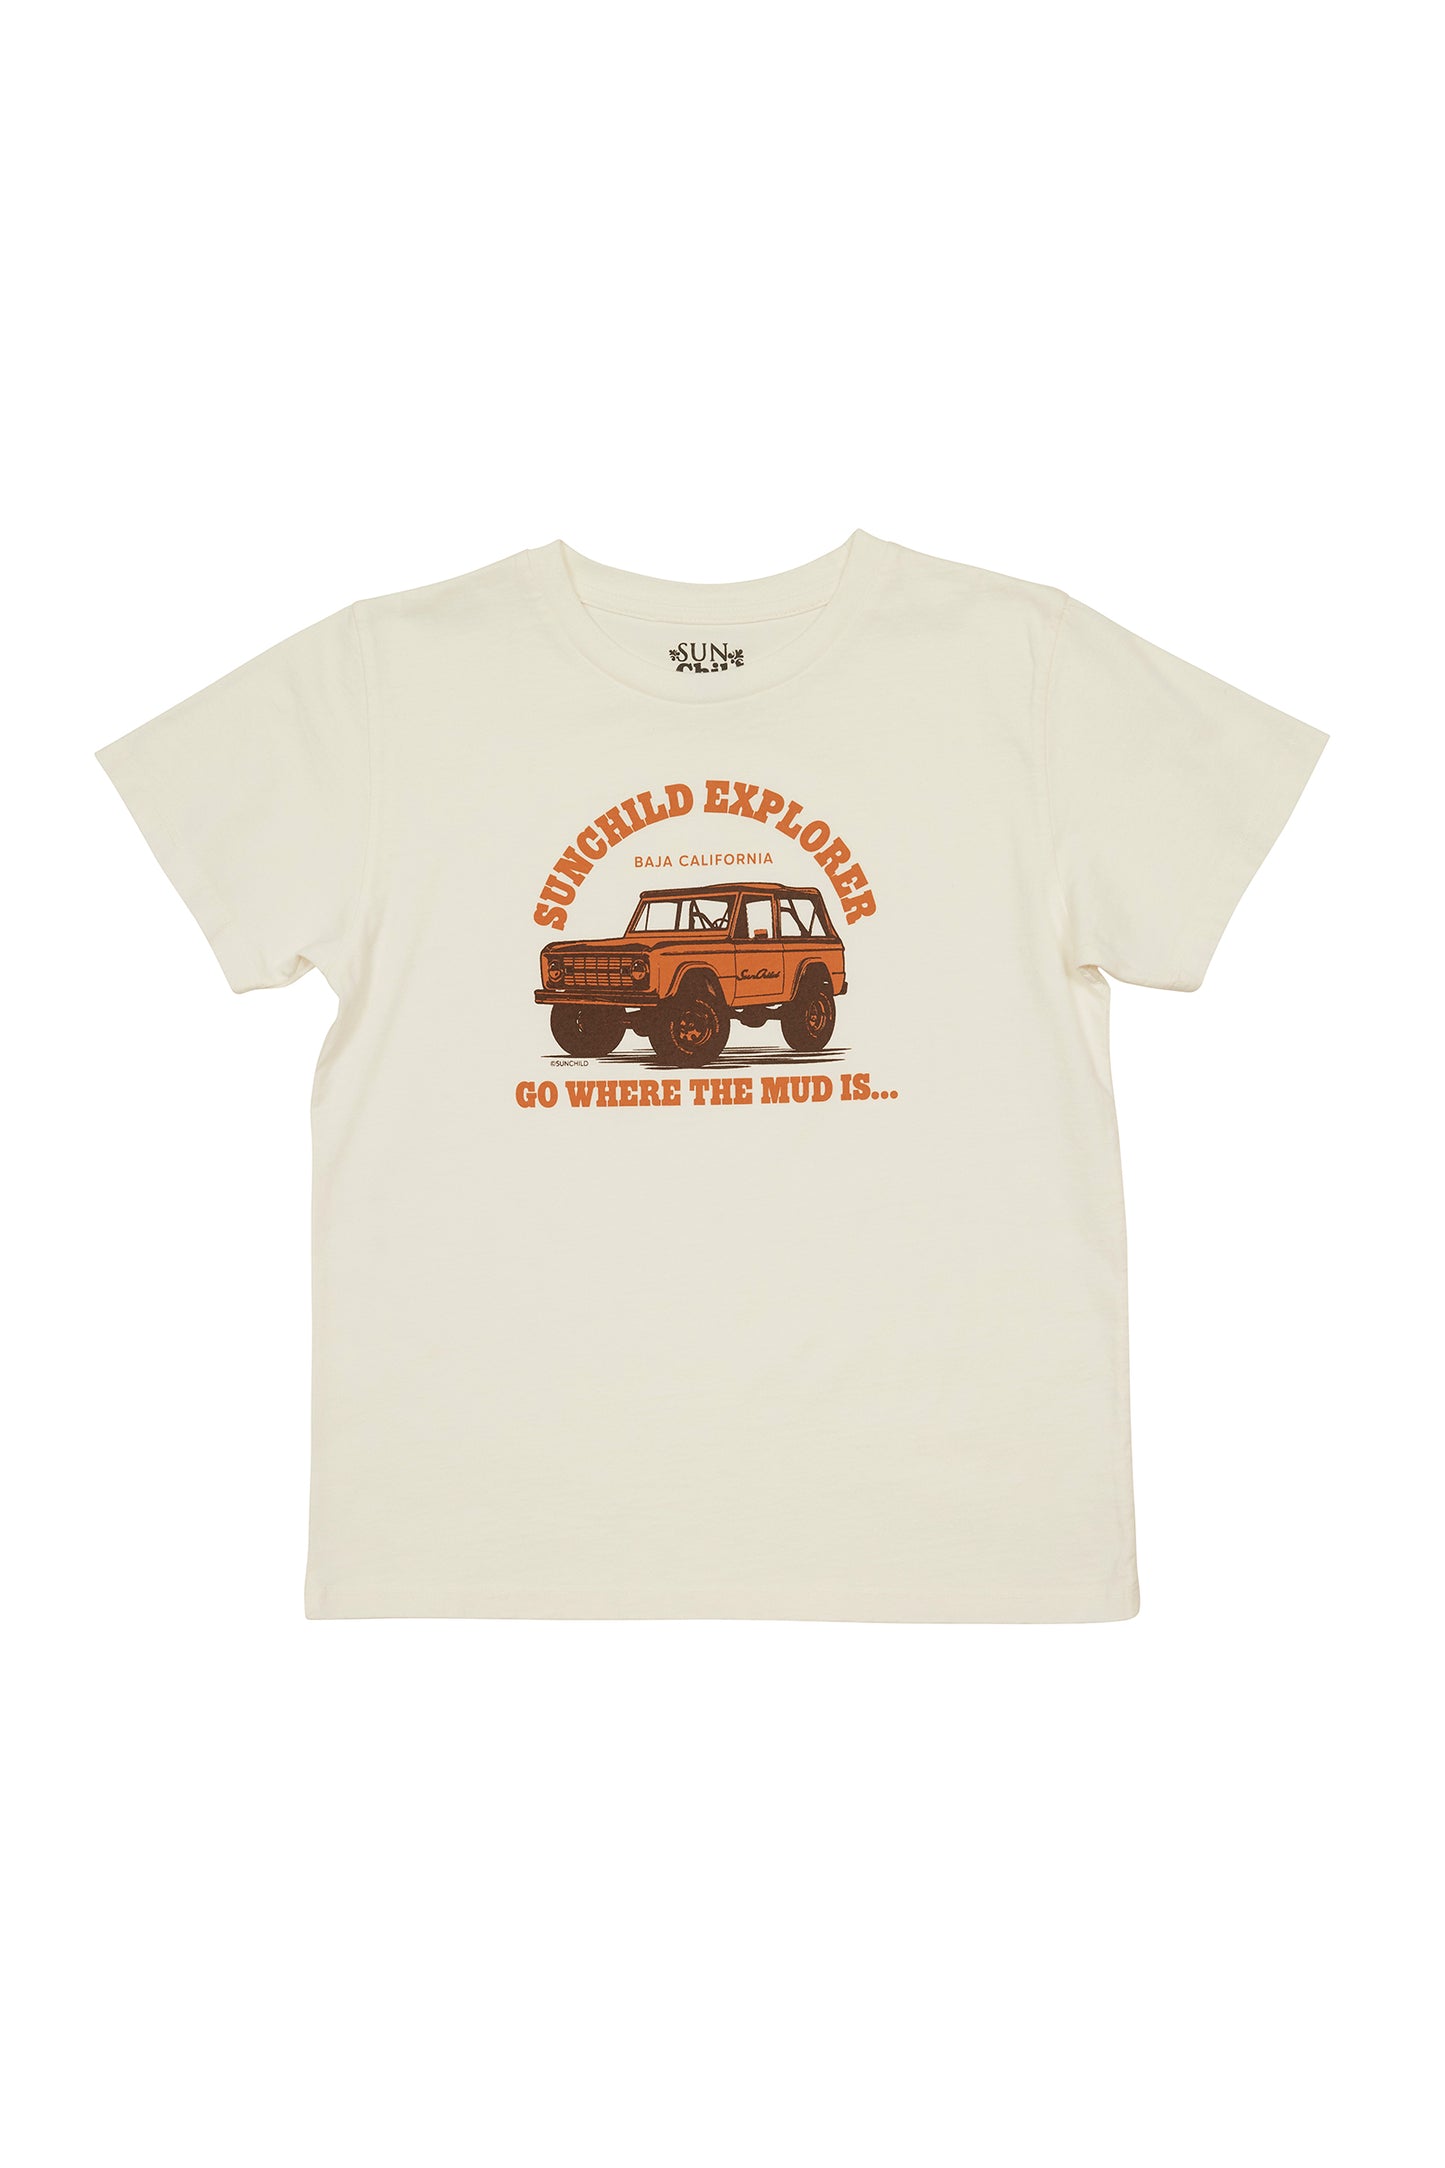 Off white t-shirt with an orange jeep with the Sunchild logo